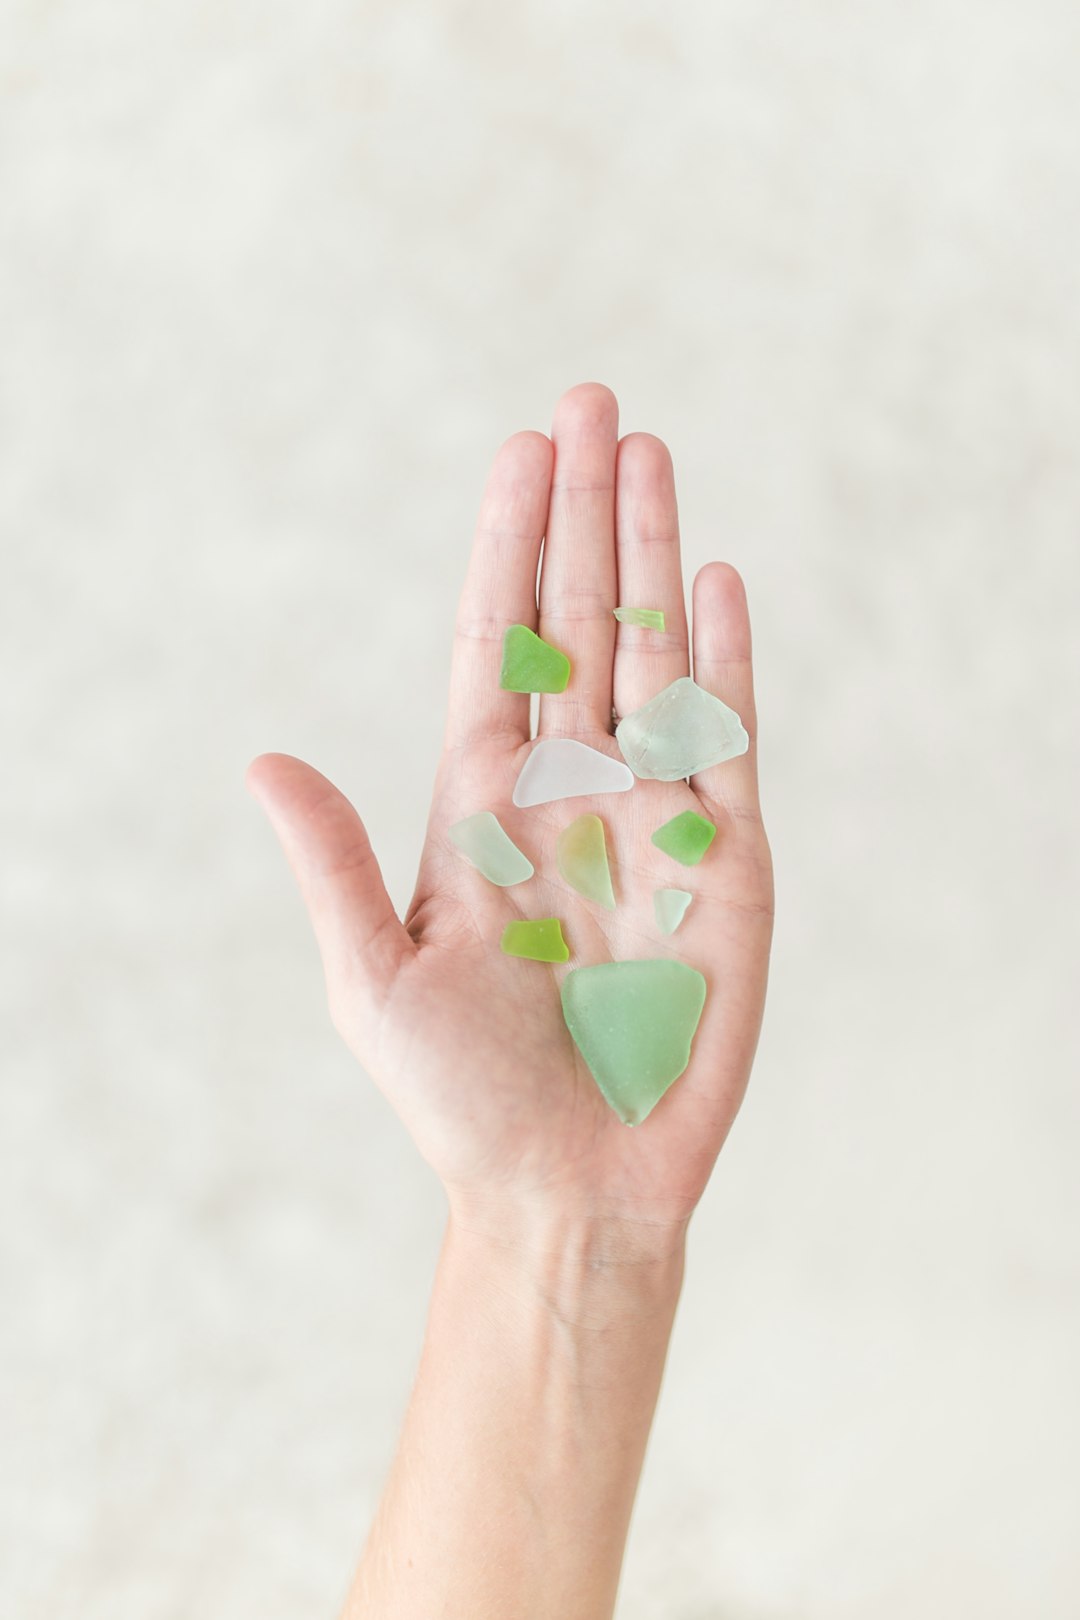 ivory coast, palm oil, person holding green shards